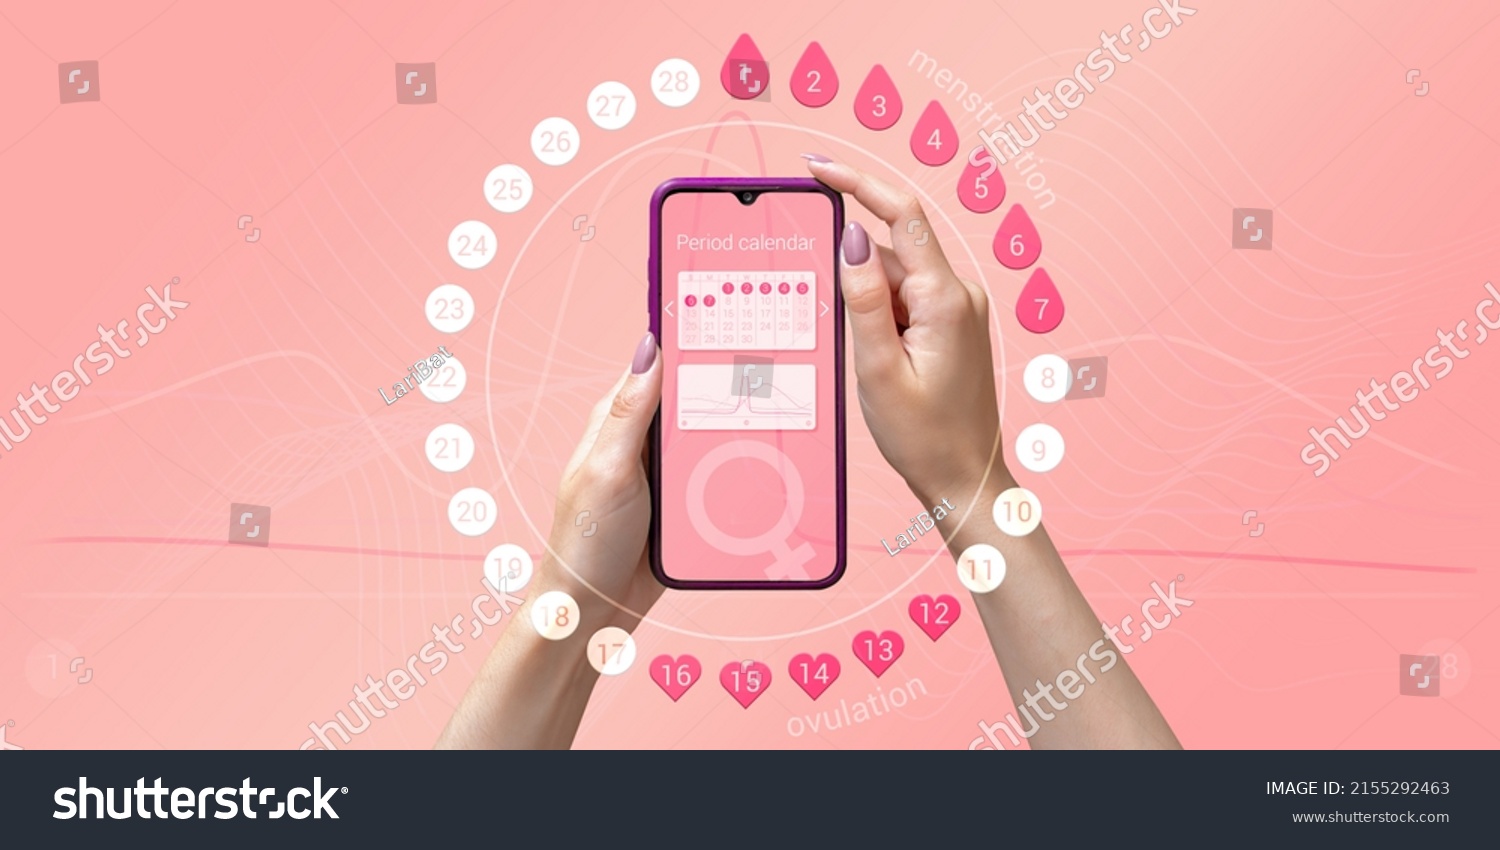 Menstrual cycle tracker mobile app on smartphone screen in hands of woman, graphic representation of period calendar on pink background. Modern technologies for women's health, pregnancy planning #2155292463